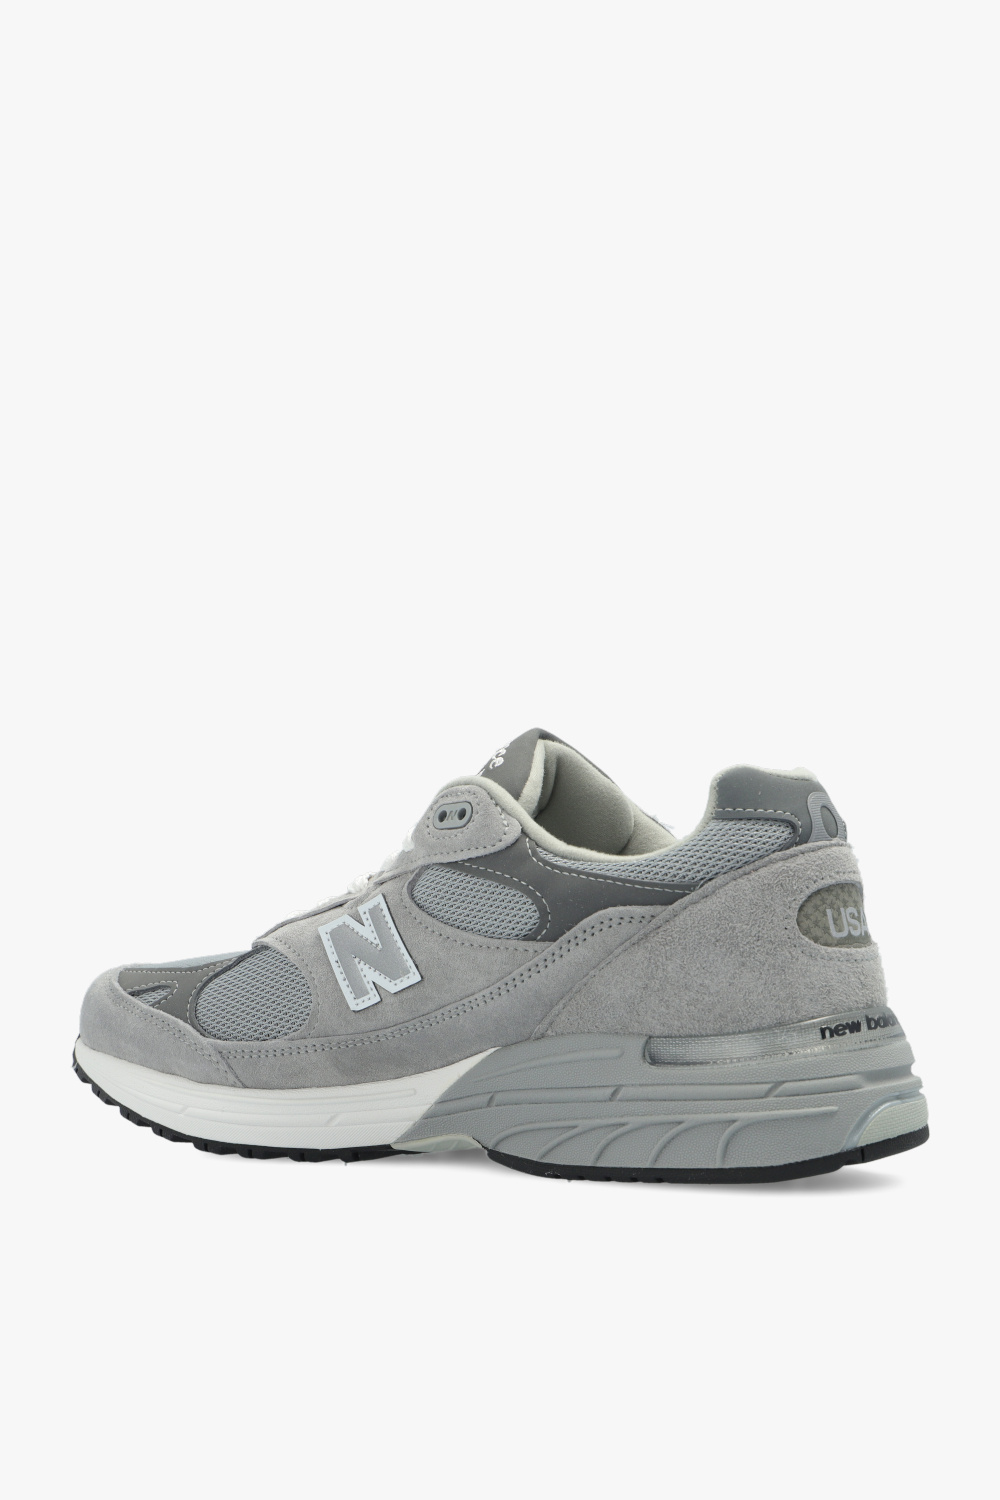 New Balance 'MR993GL' sneakers from 'Made in UK' series | Men's ...